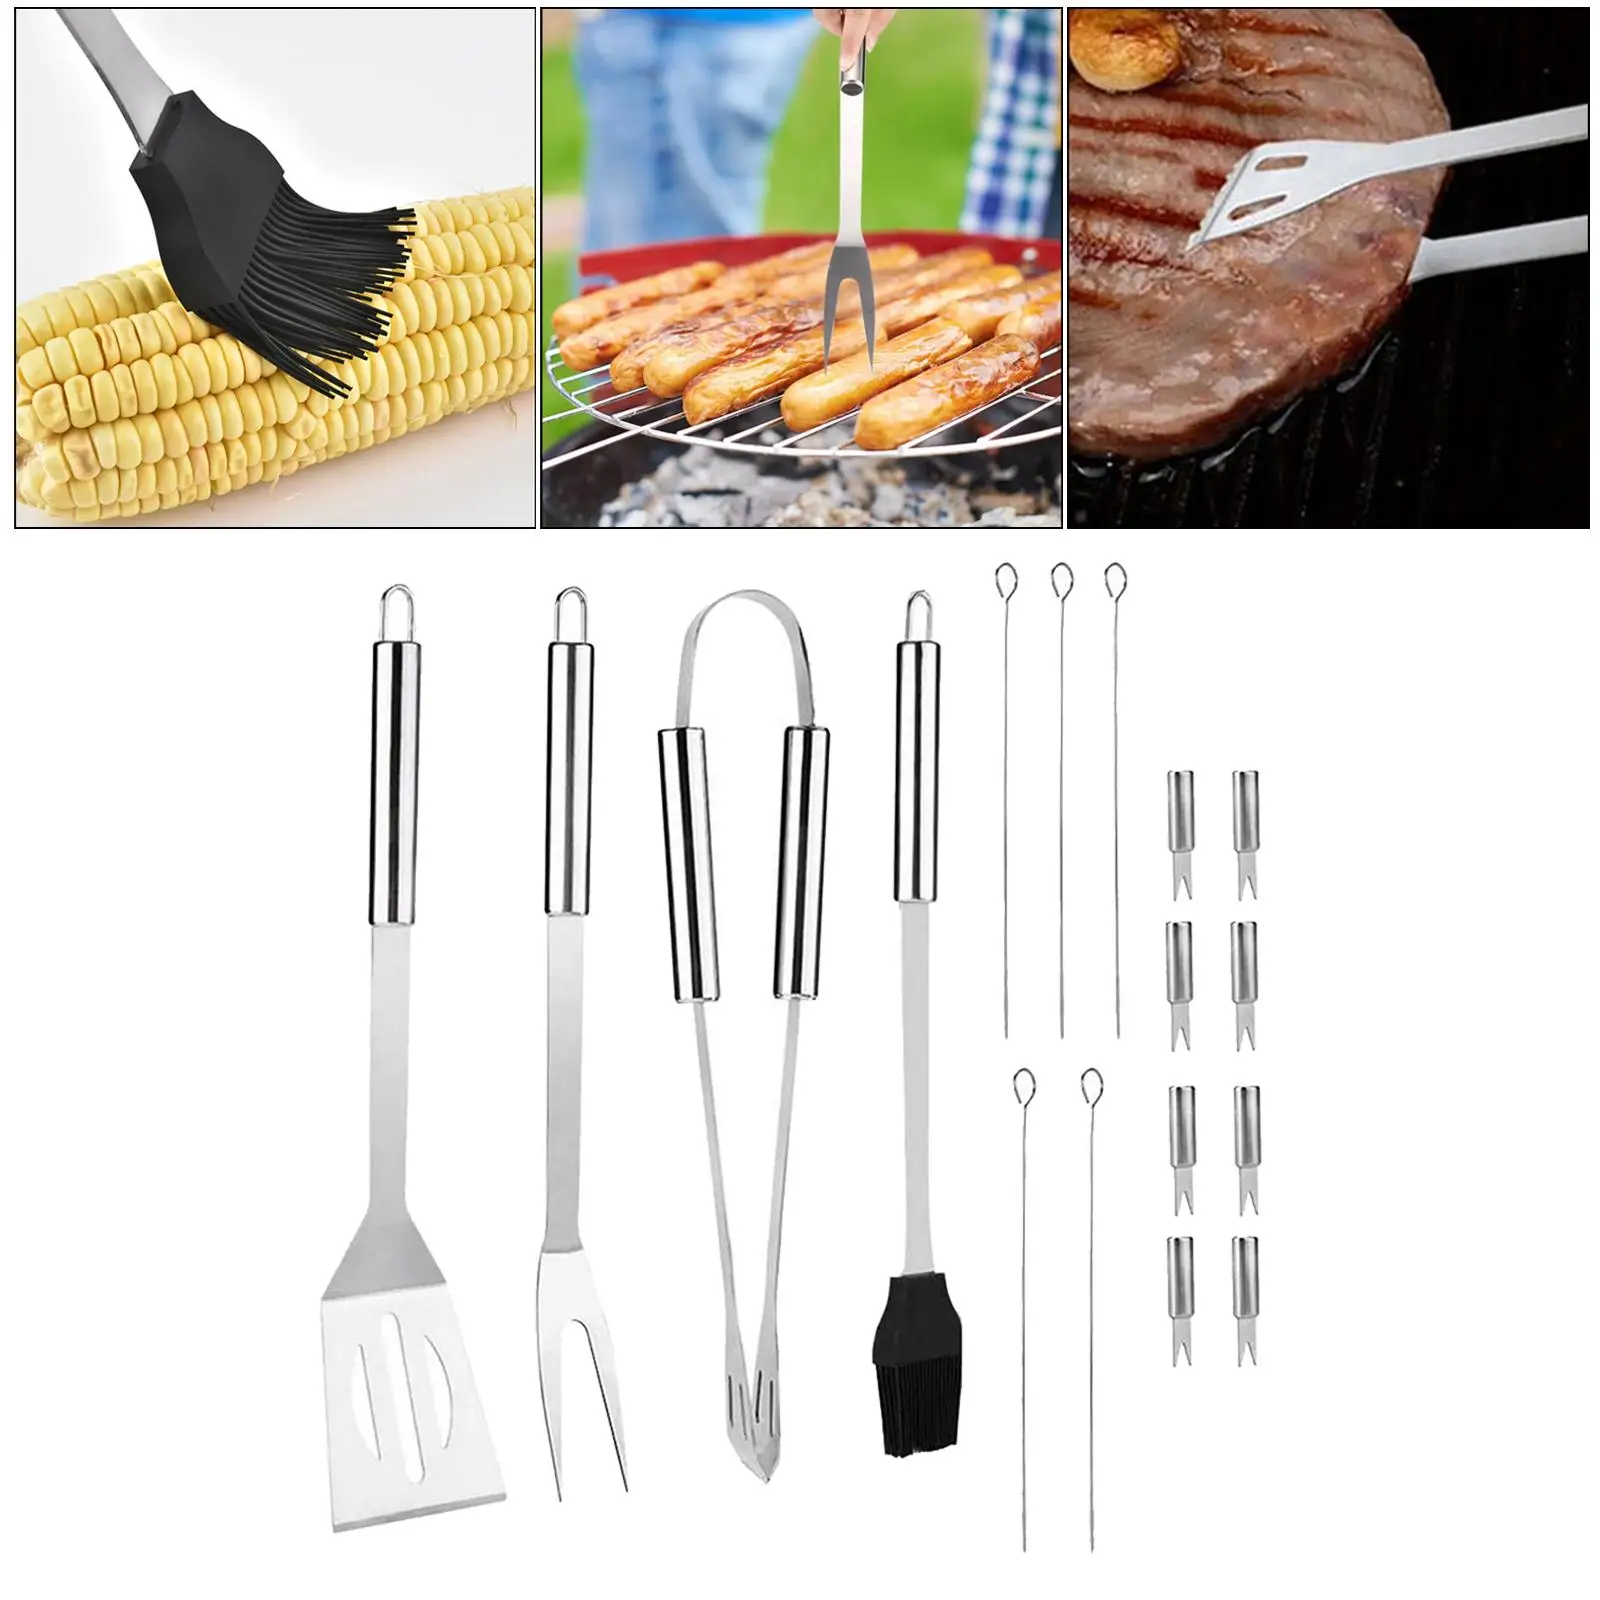  Tool  Fork Skewers Barbecue Grilling in Portable Bag